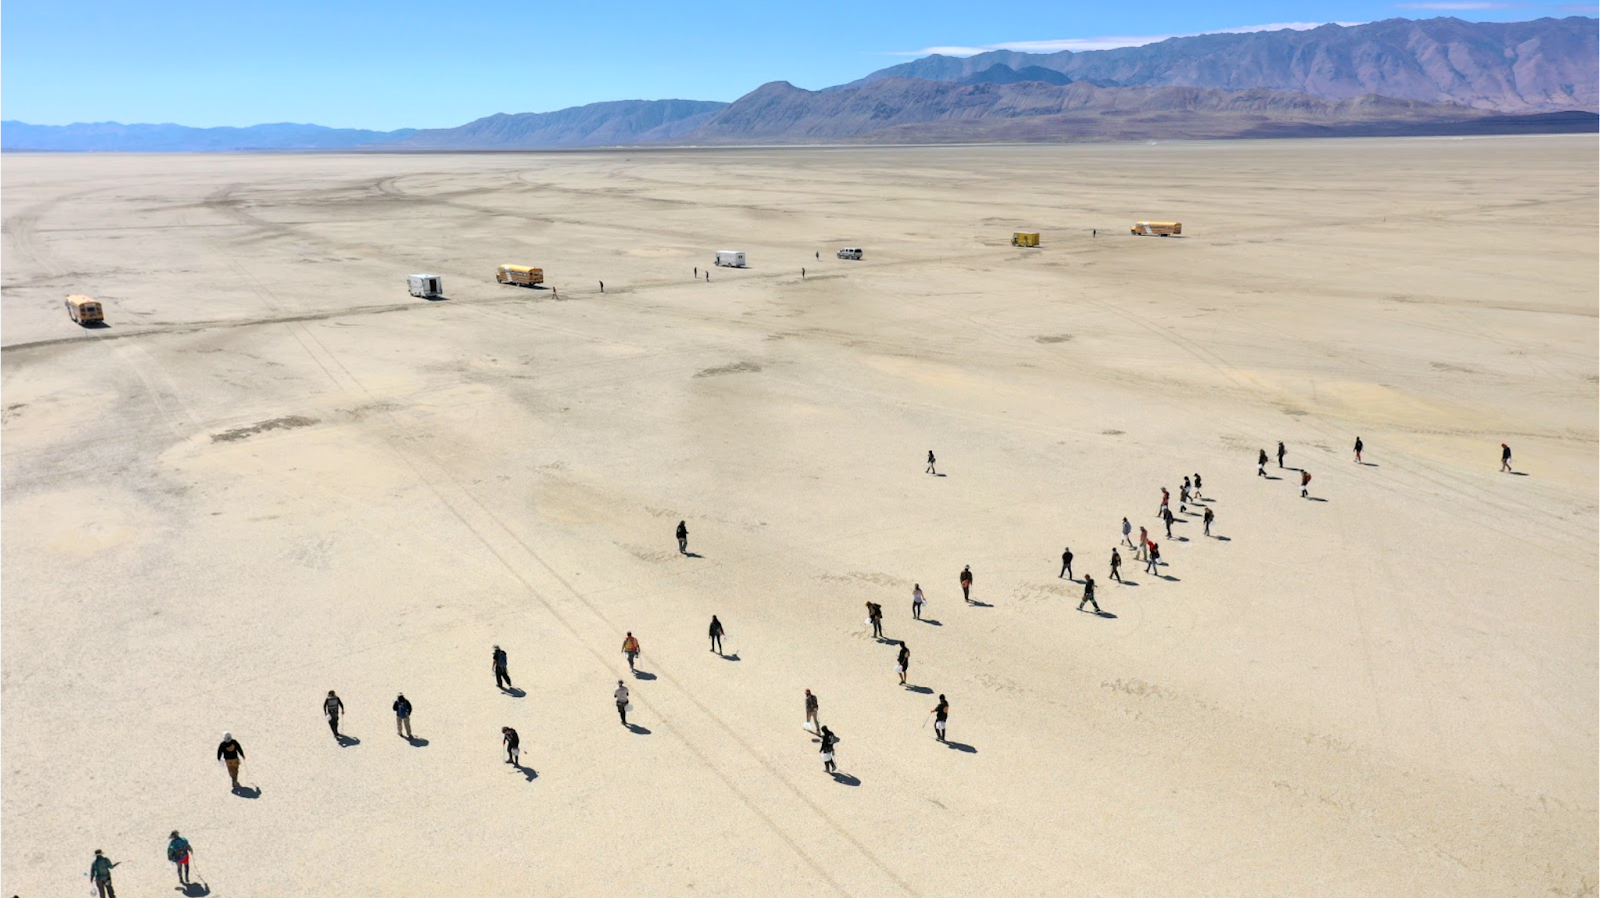 An image showing a MOOP clean up crew at Burning Man.